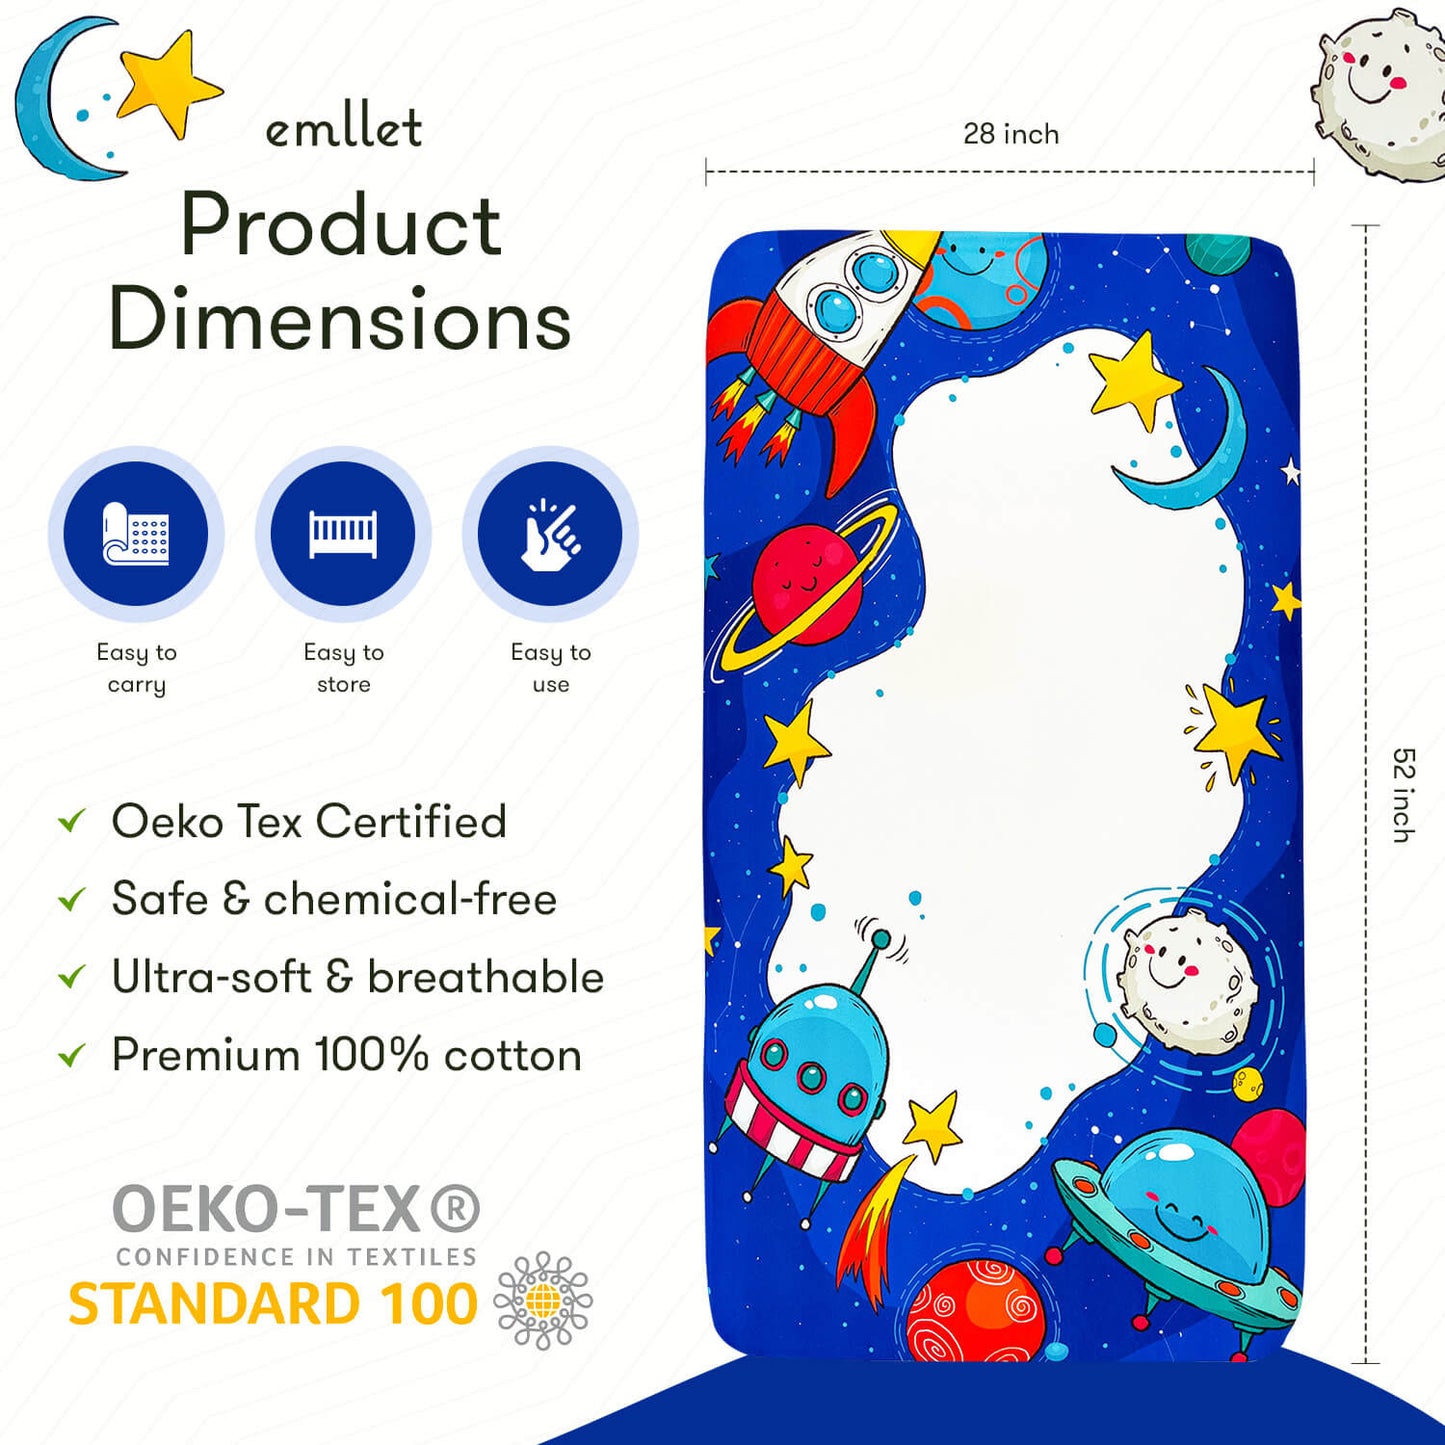 Emllet Space Crib Sheet, product dimensions